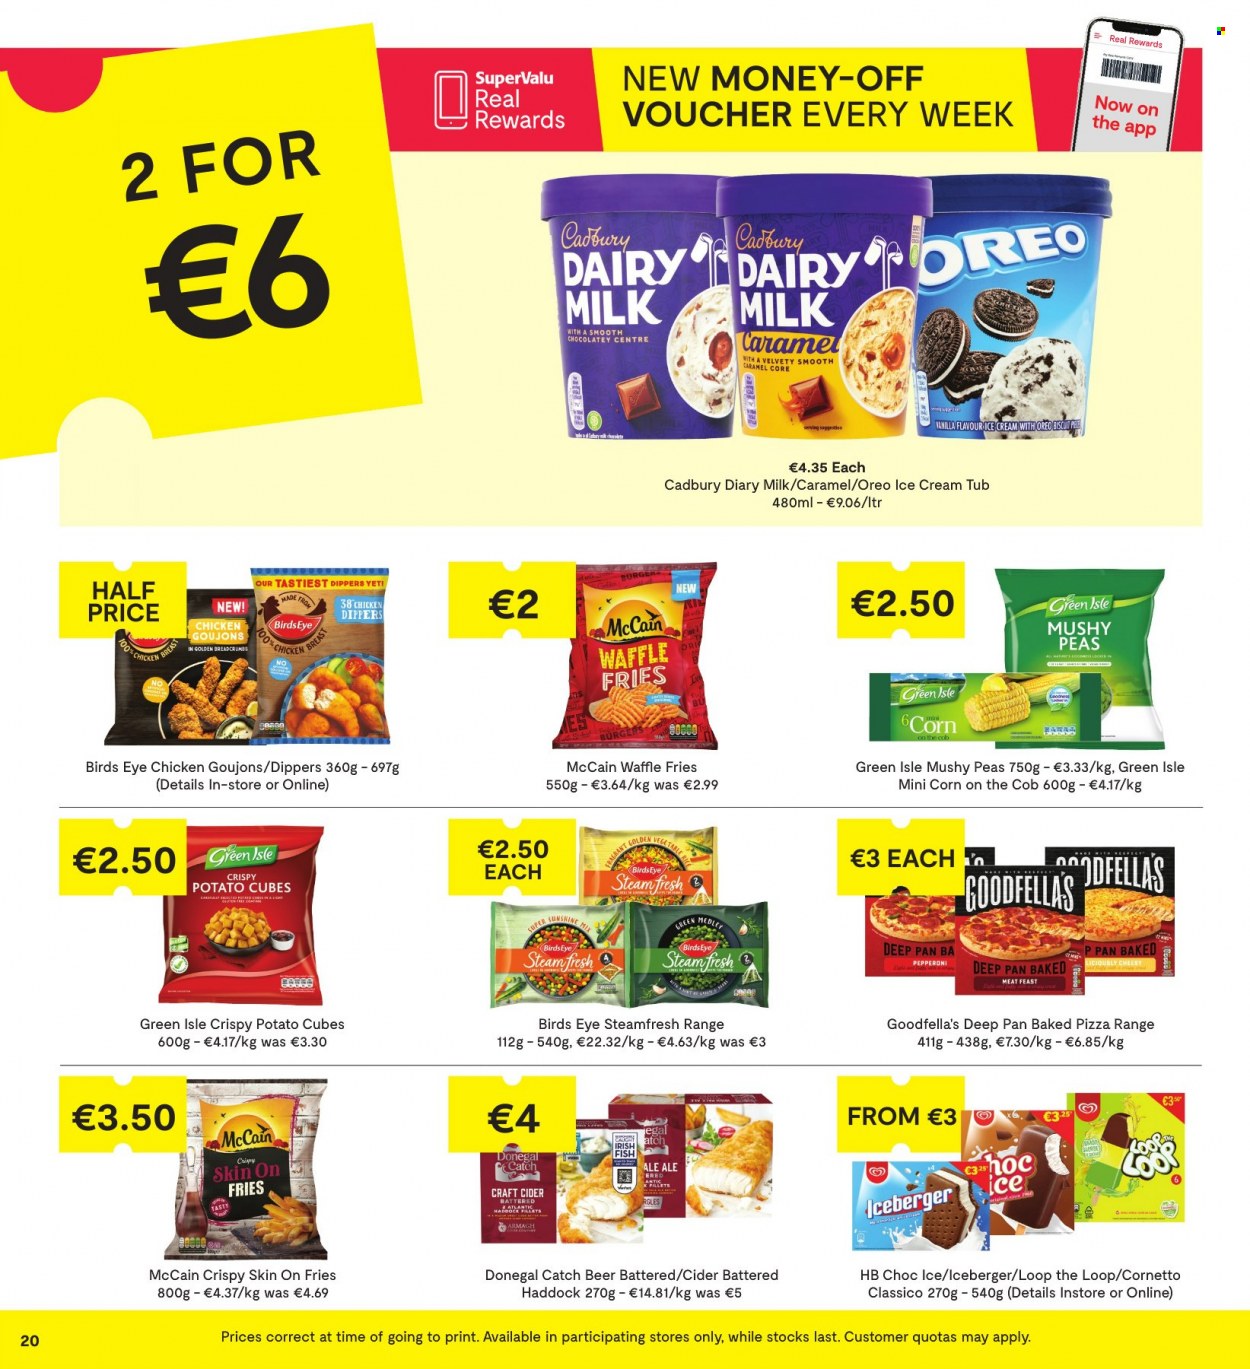 thumbnail - SuperValu offer  - 26.05.2022 - 08.06.2022 - Sales products - breadcrumbs, corn, peas, haddock, fish, pizza, hamburger, Bird's Eye, pepperoni, Oreo, milk, Sunshine, ice cream, Cornetto, chicken dippers, Donegal Catch, McCain, potato fries, biscuit, Cadbury, caramel, Classico, cider, beer, diary. Page 20.